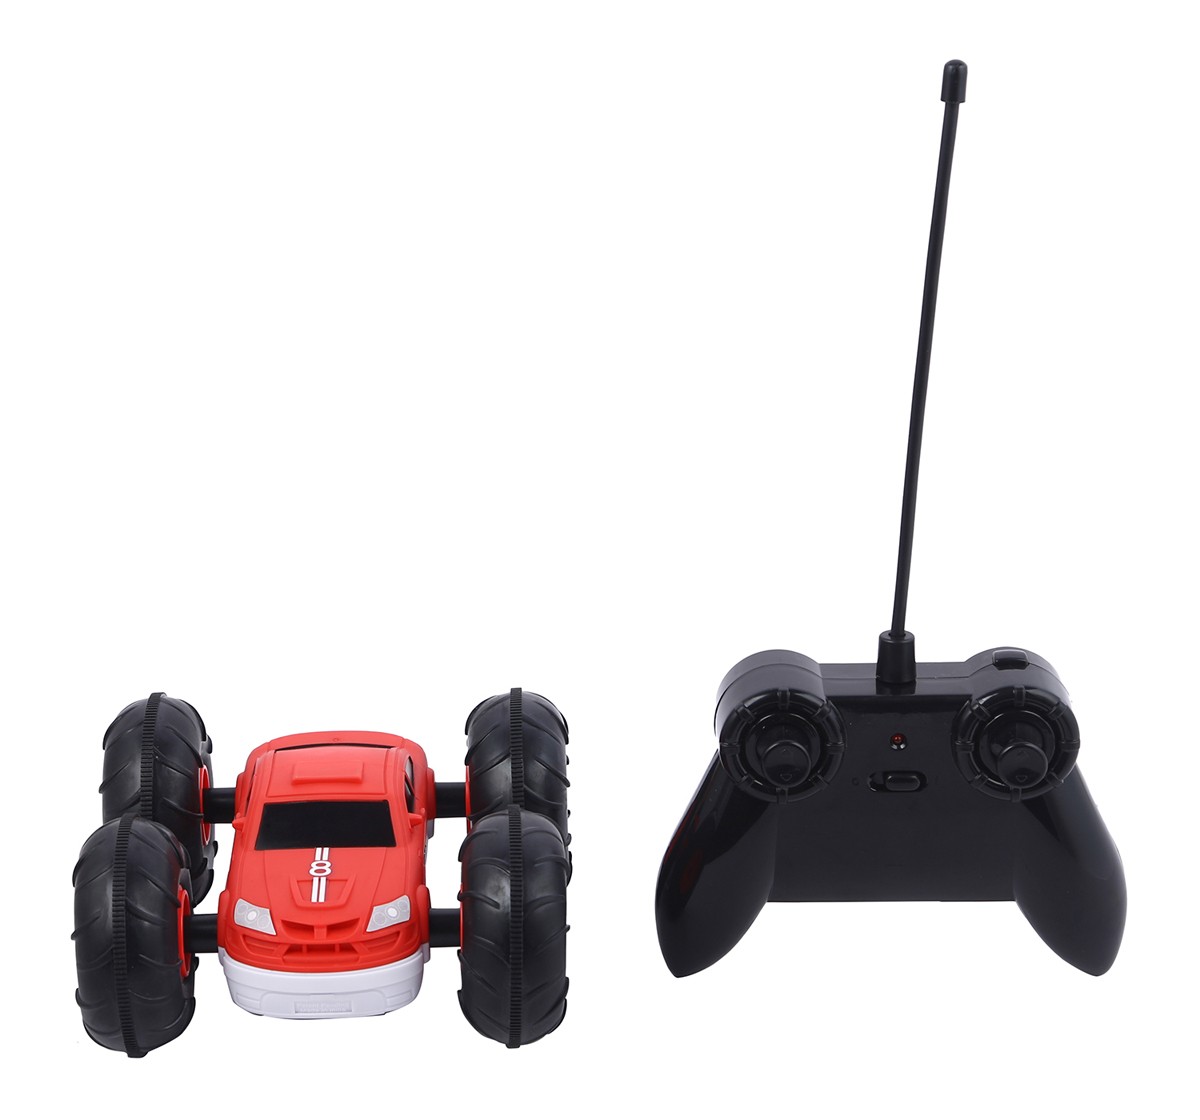 Flip Stunt Rally Car Remote Controlled Car by Sharper Image, For Kids 6 Years and Above, Red